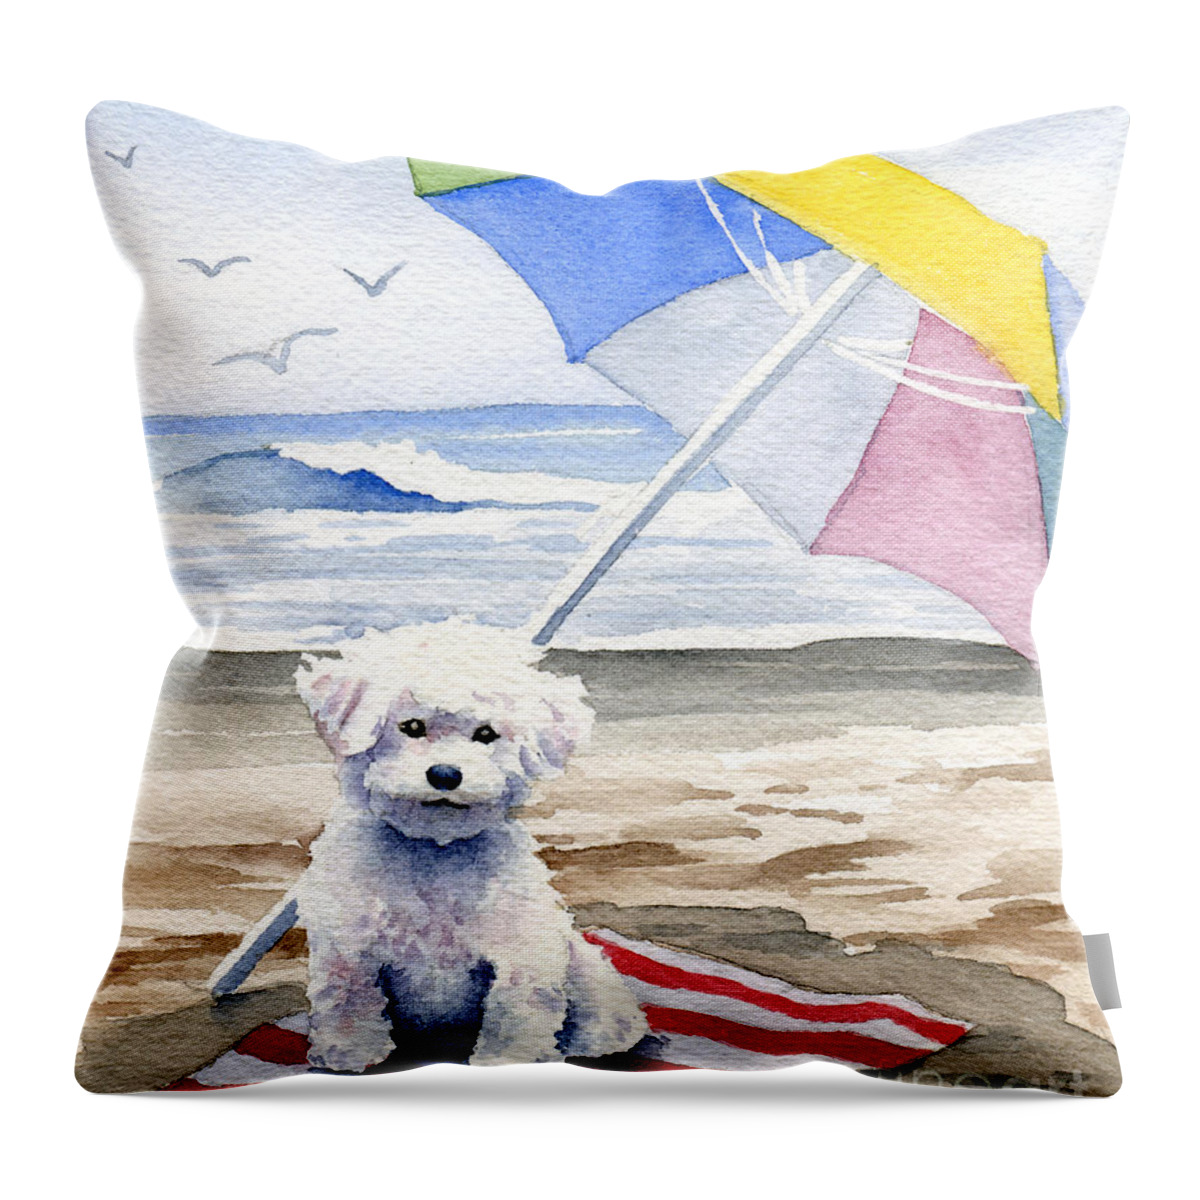 Bichon Throw Pillow featuring the painting Bichon Frise At The Beach II by David Rogers